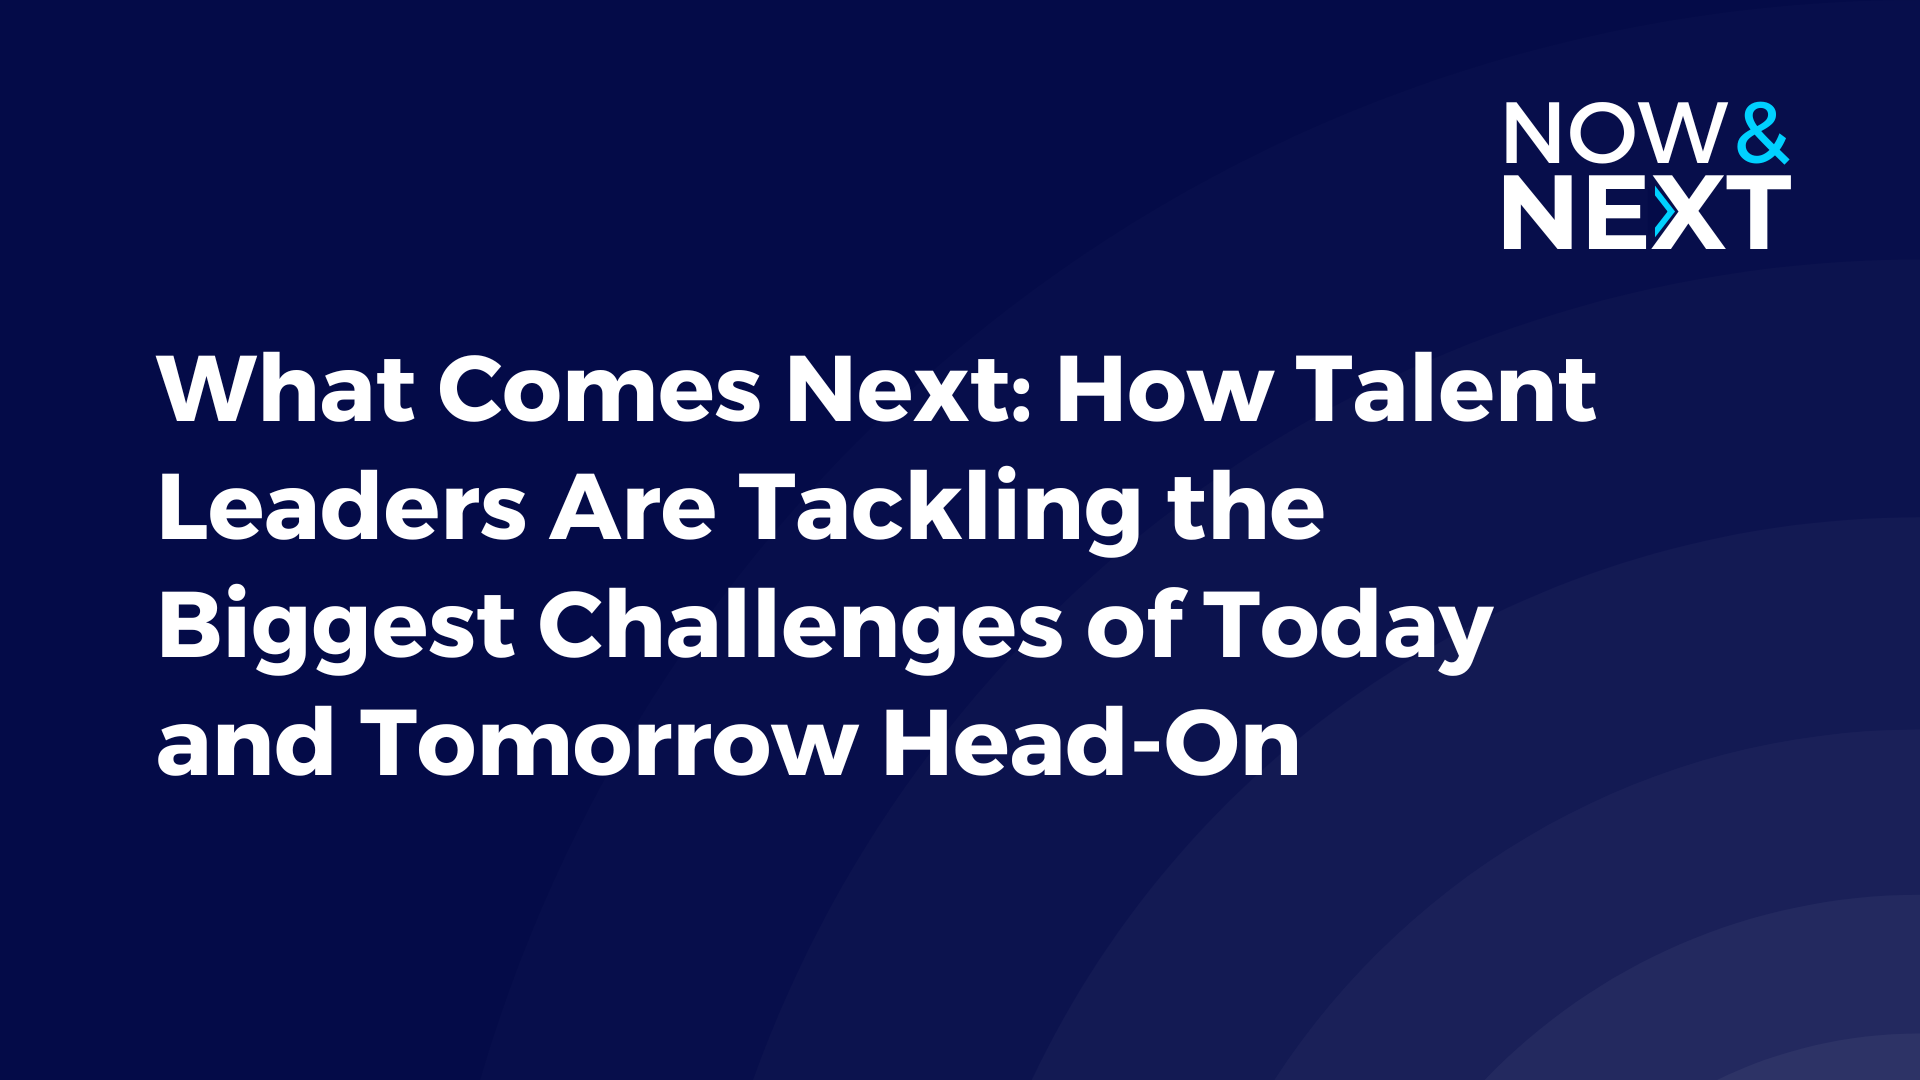 Now & Next What Comes Next How Talent Leaders Are Tackling the